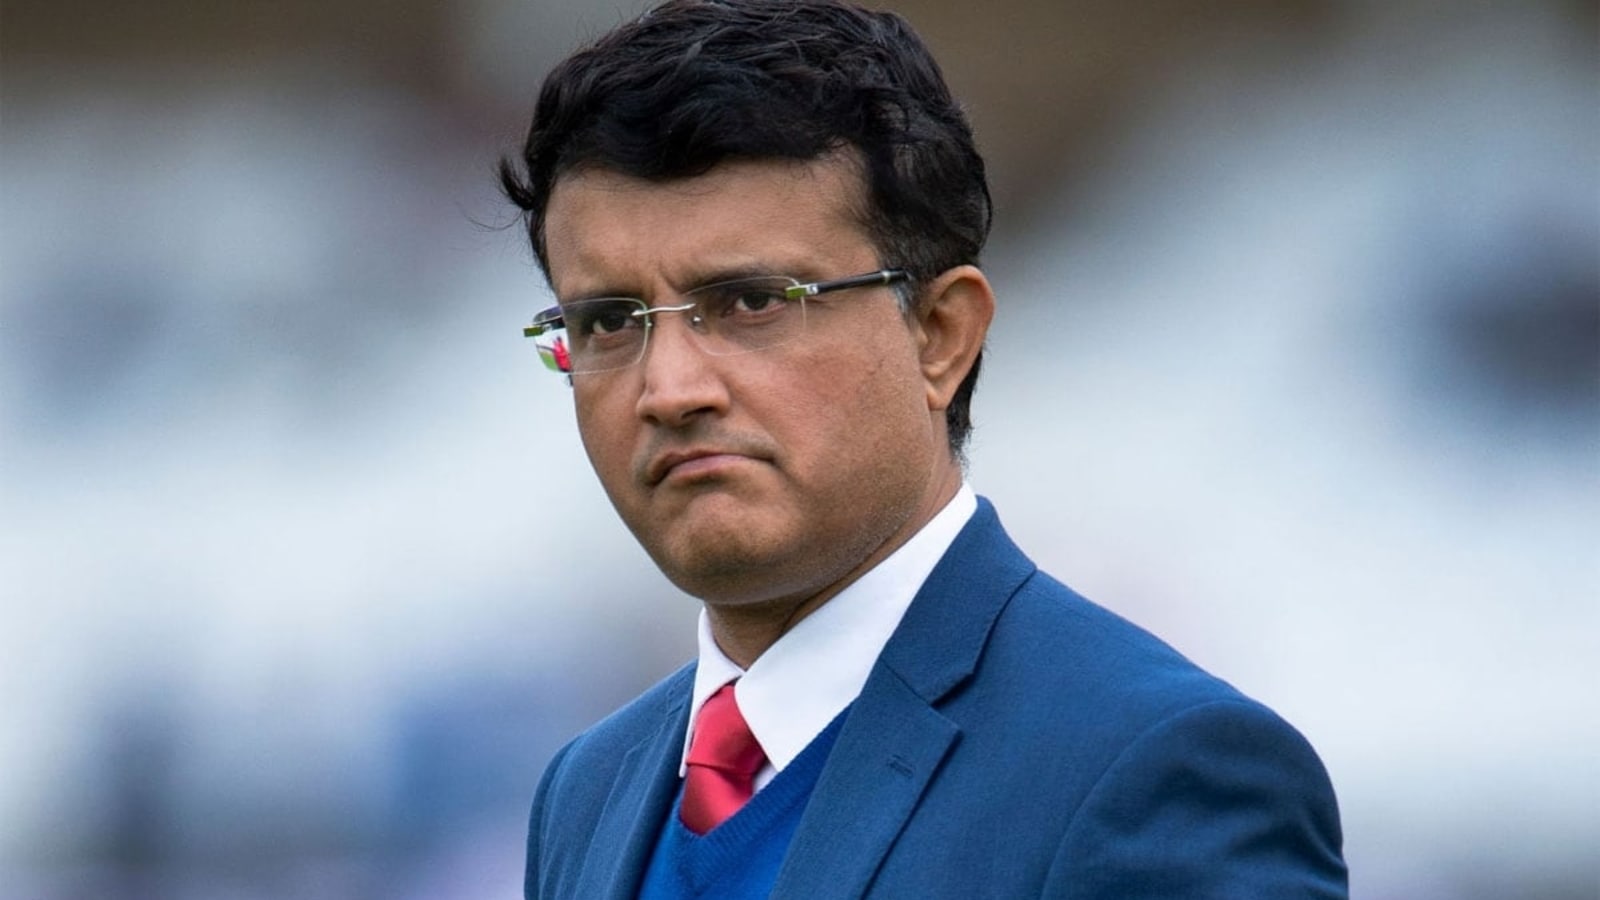 You don't become champions easily': BCCI President Sourav Ganguly gives advice to Indian team ahead of T20 World Cup | Cricket - Hindustan Times